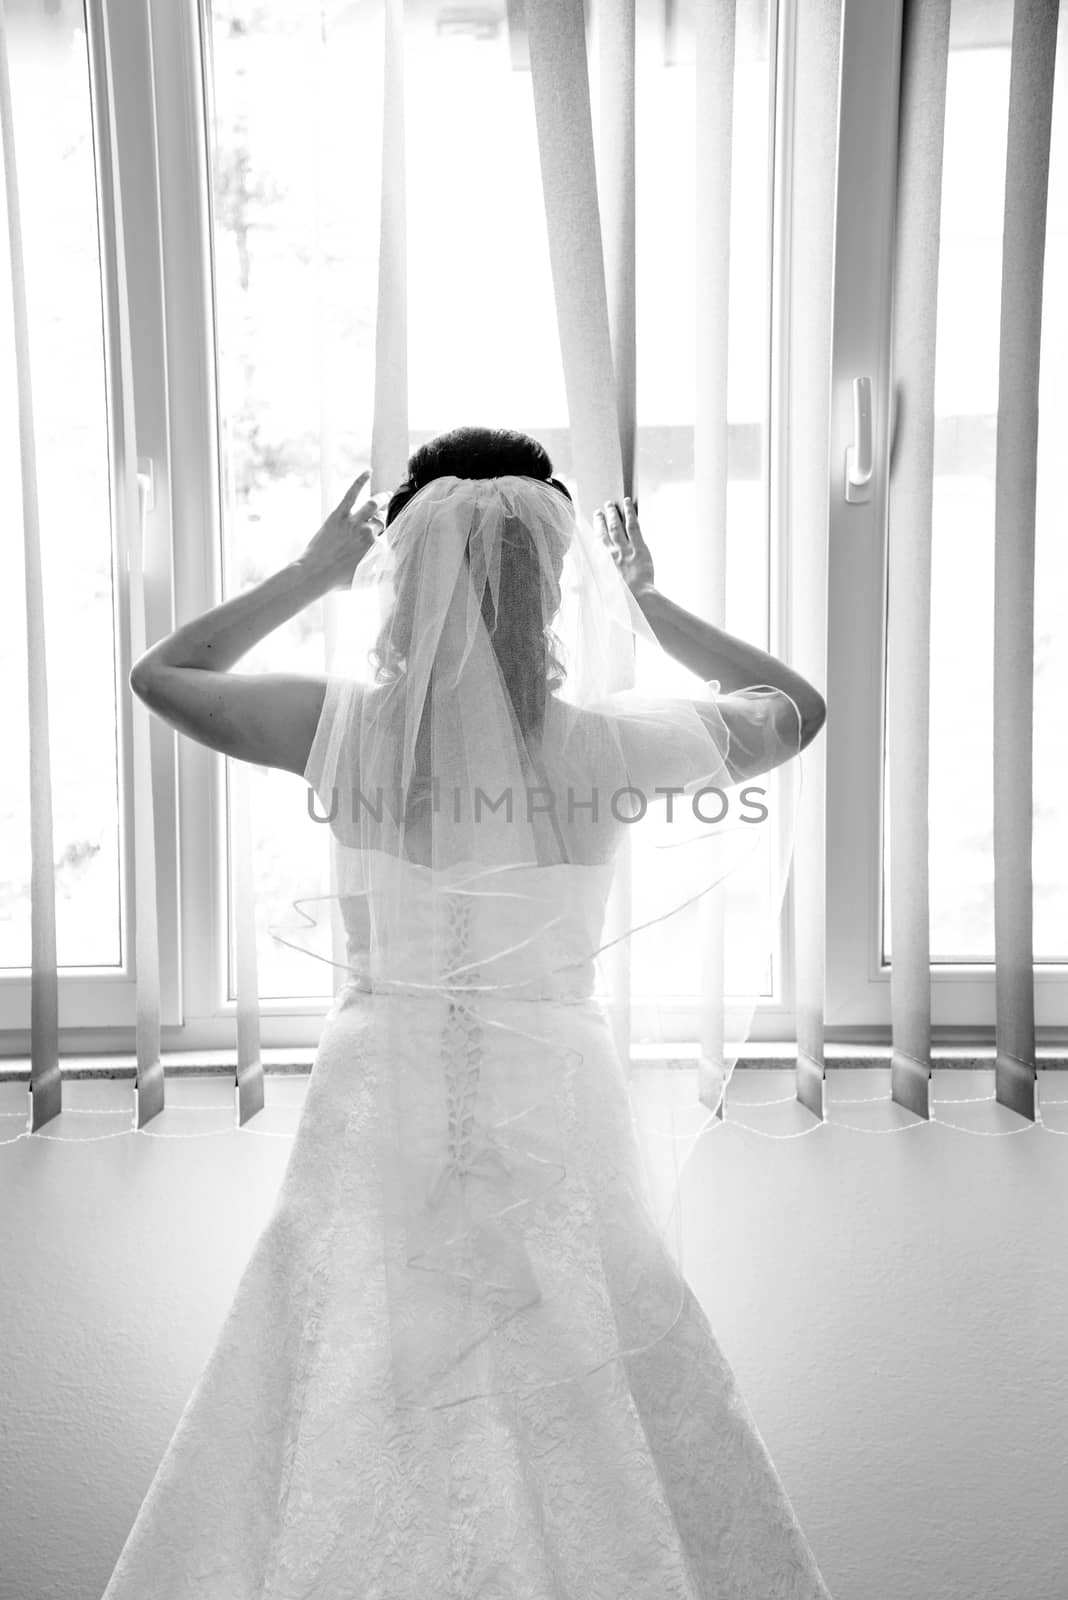 Bride on a window looking for a groom. Wedding concept